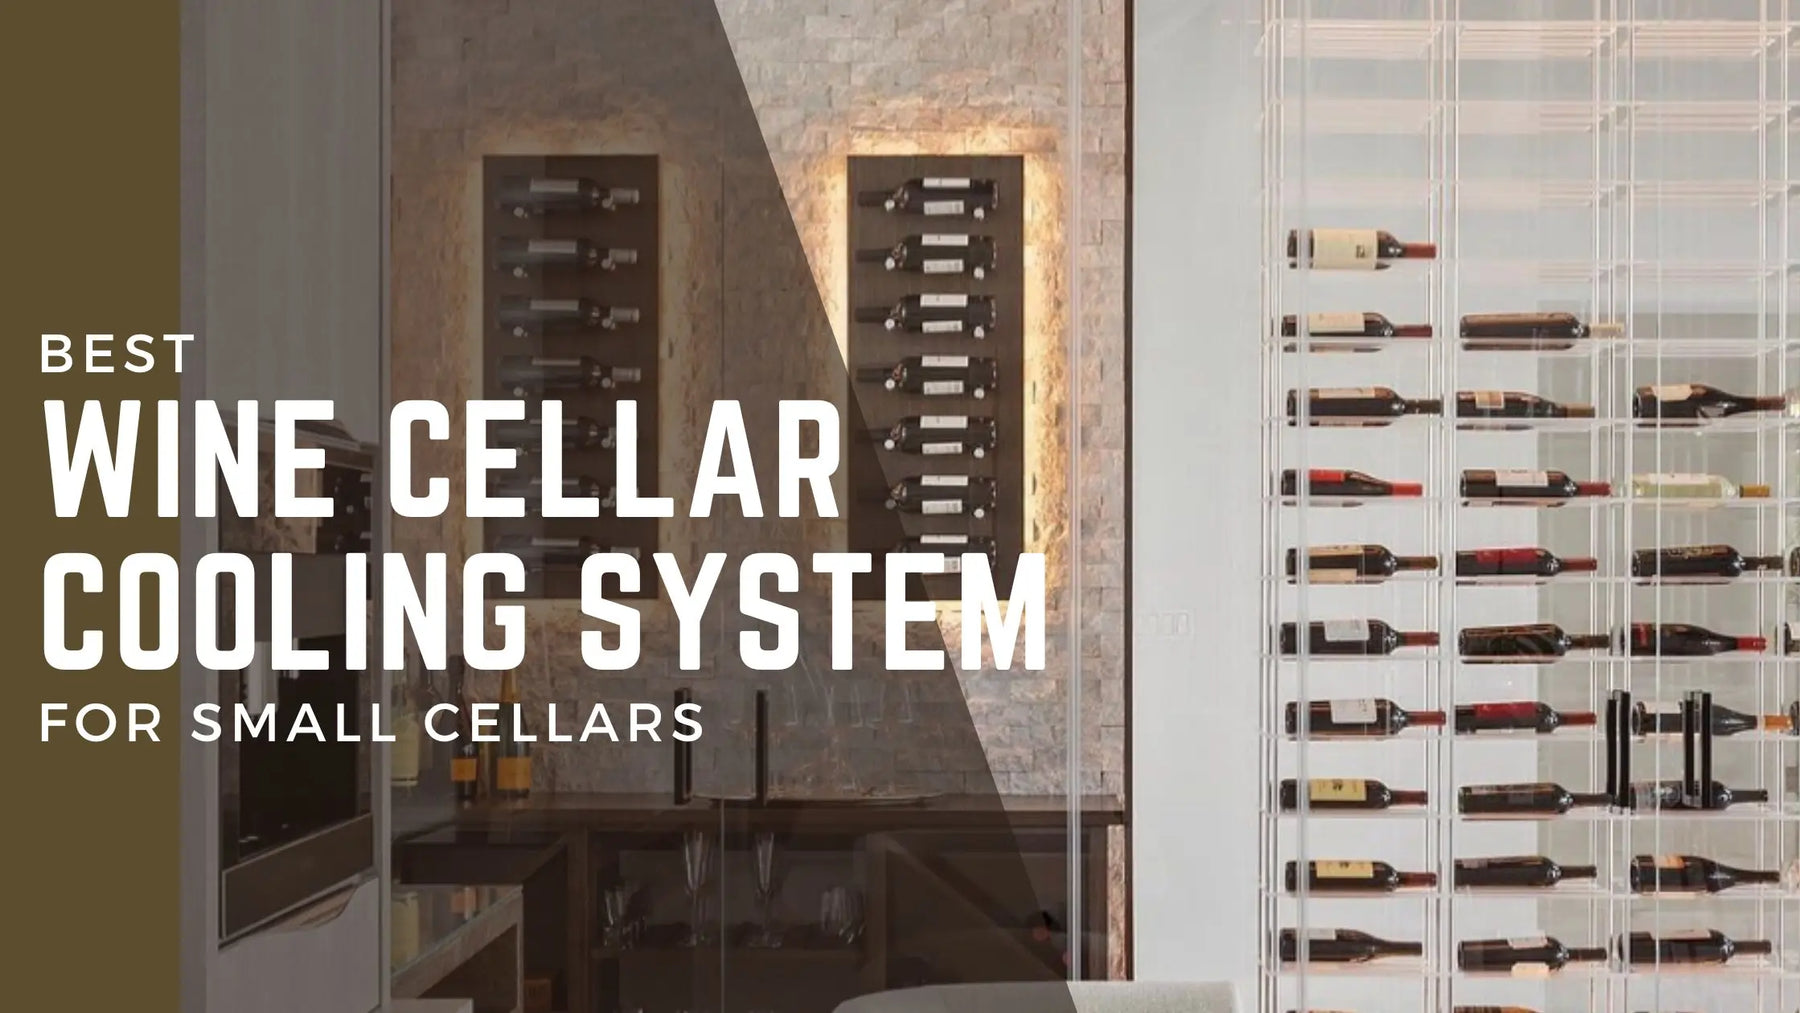 Best Wine Cellar Cooling System for Small Cellars | Wine Coolers Empire 